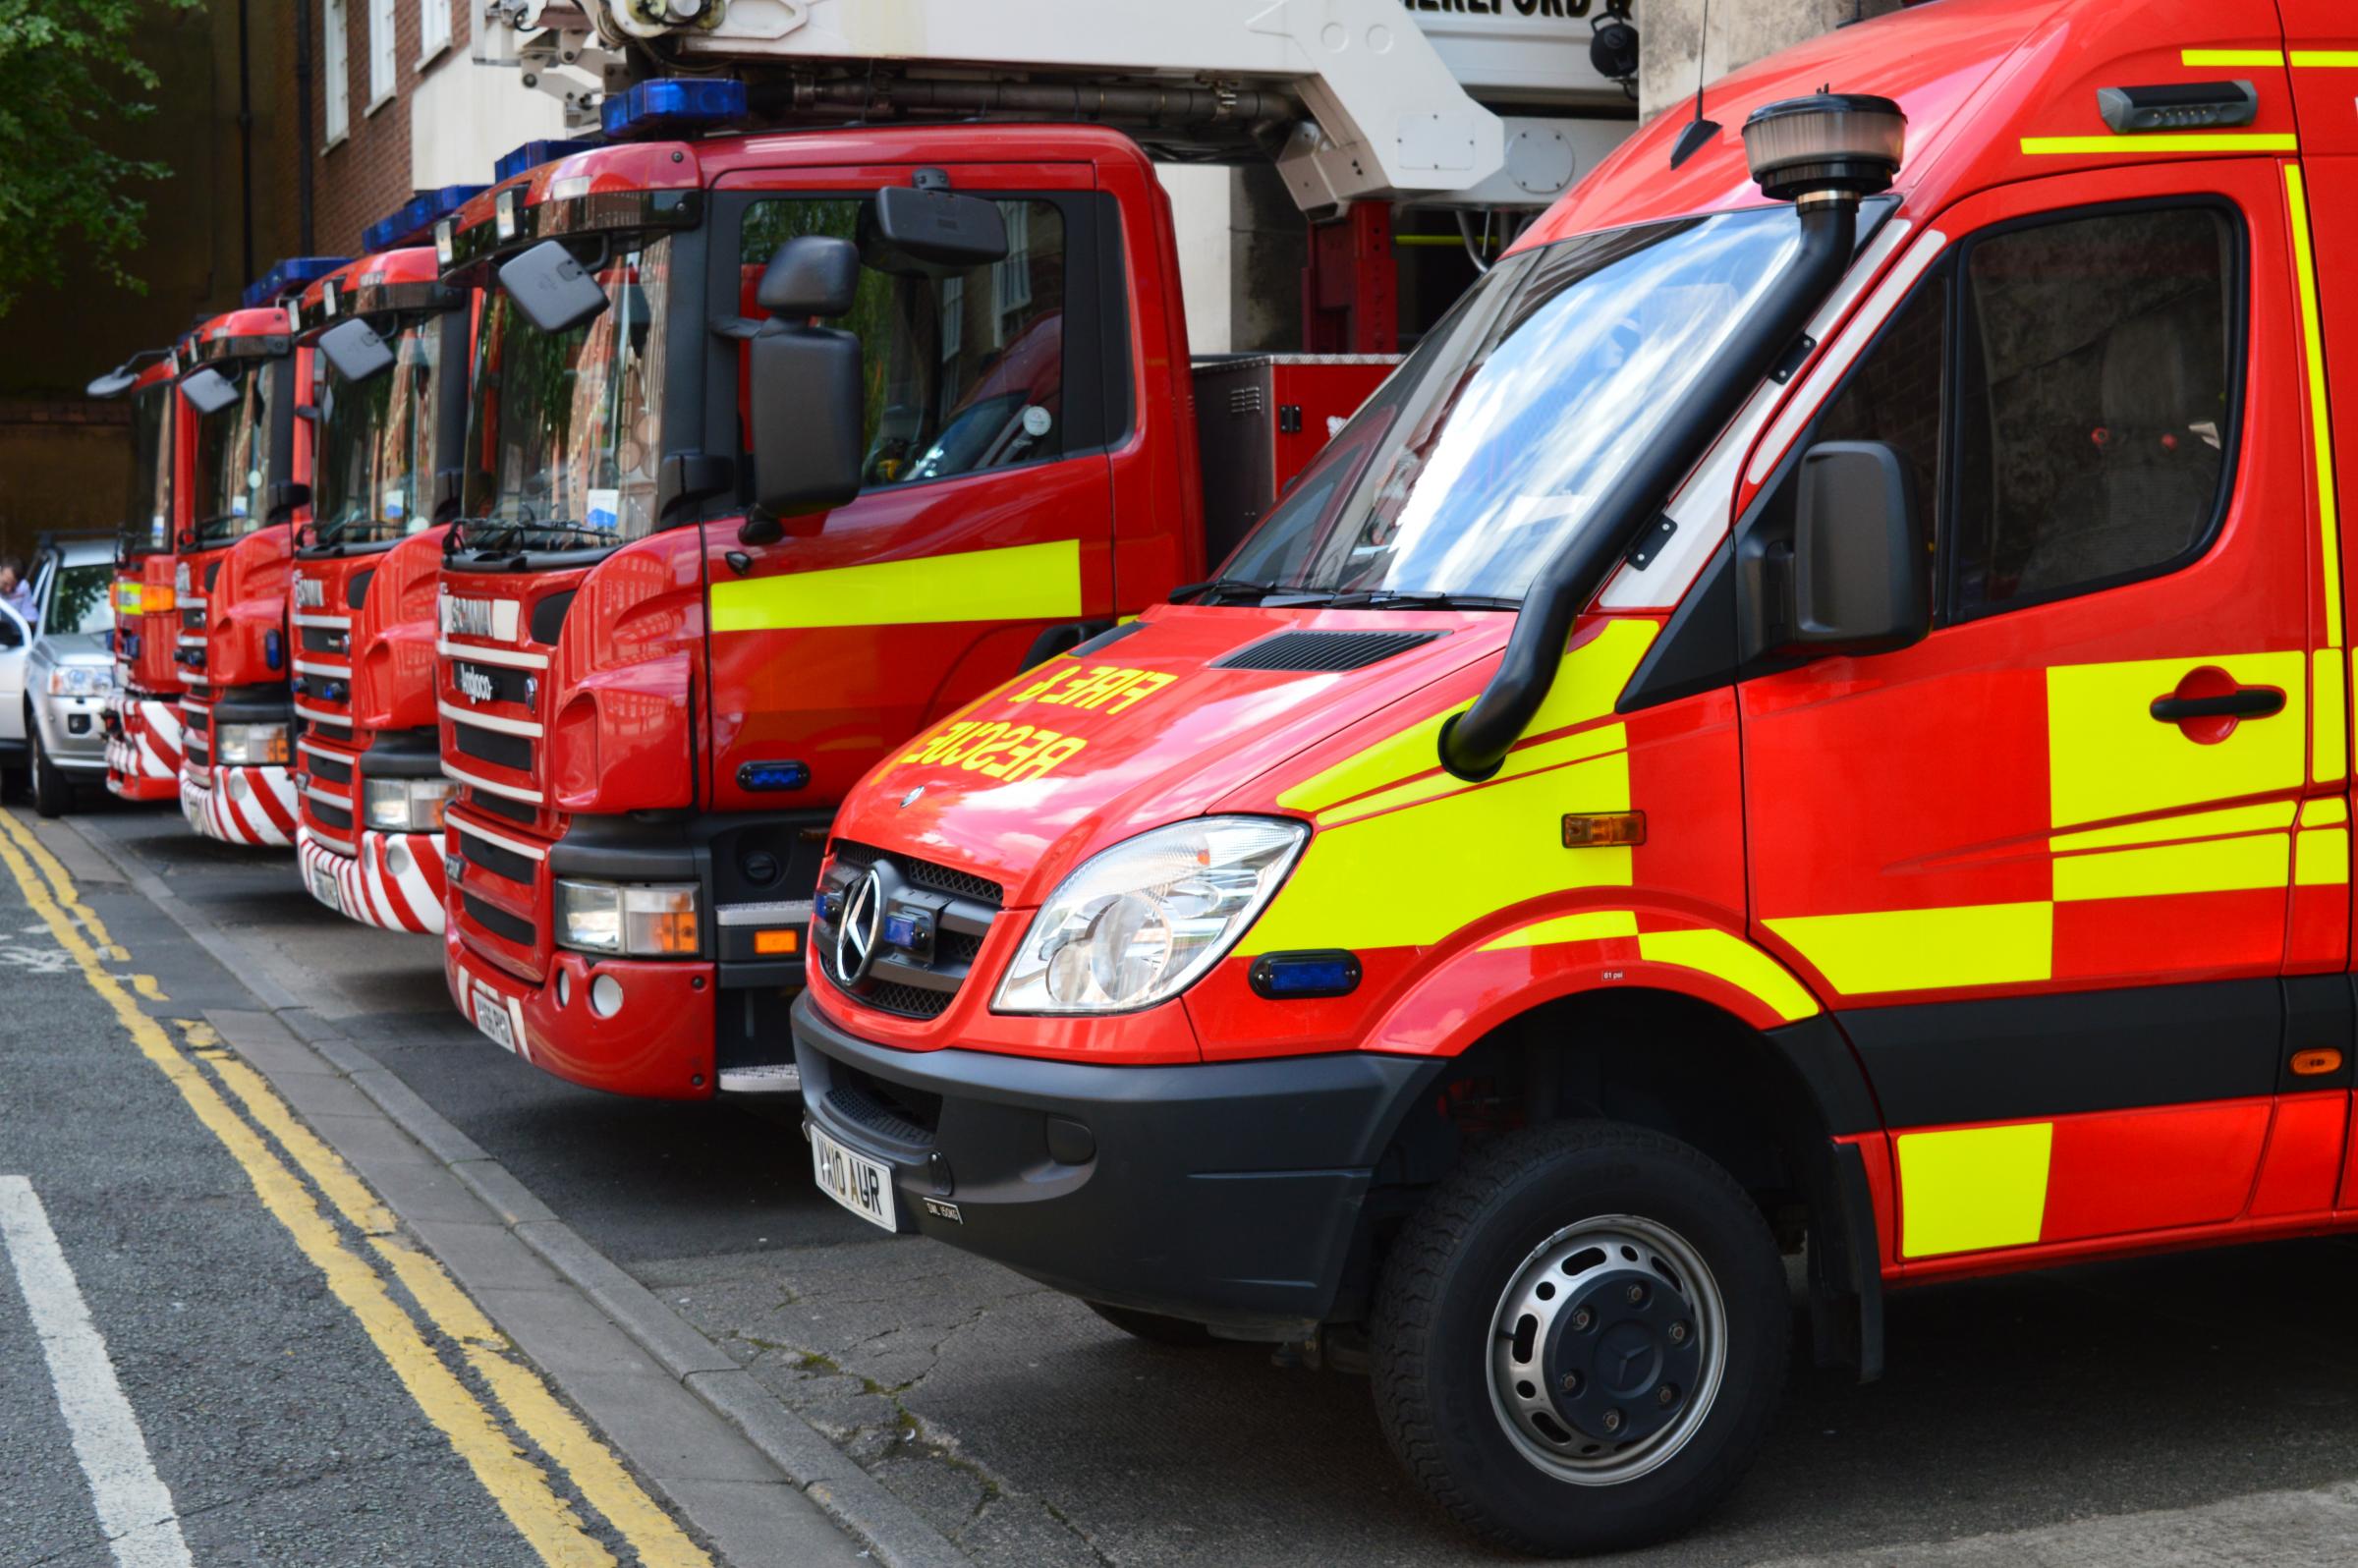 Warning after bogus calls made to local businesses asking for money to support local fire service